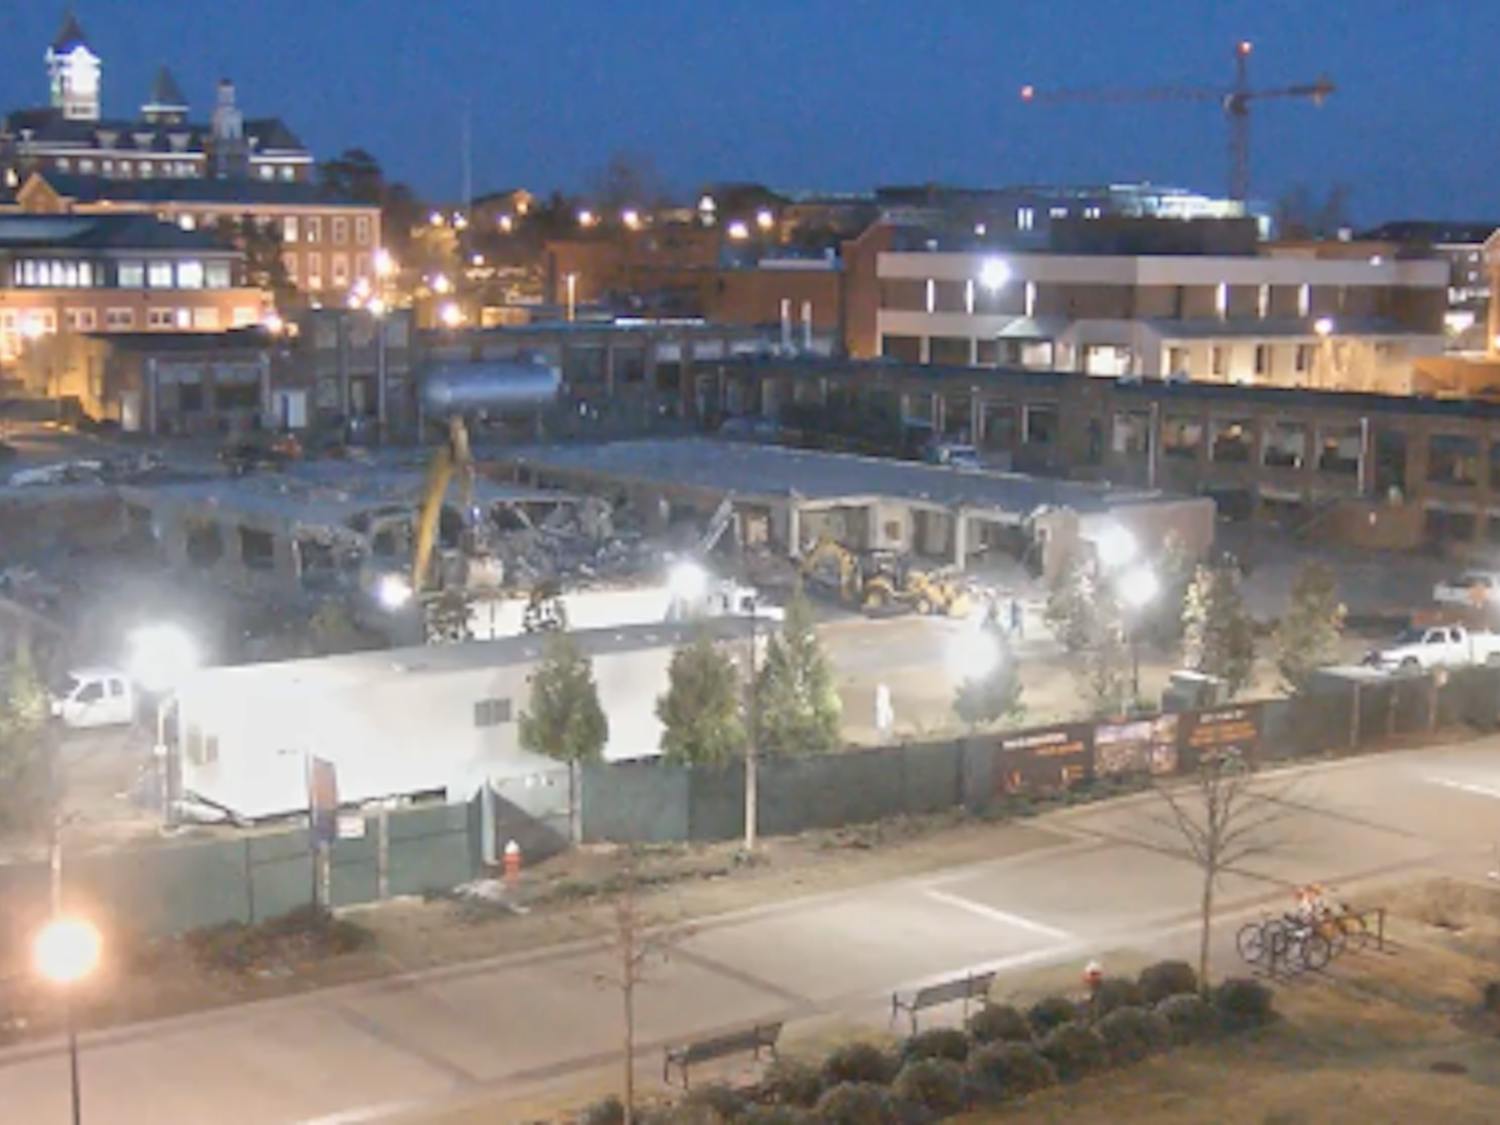 Webcam footage of the Engineering construction projects​